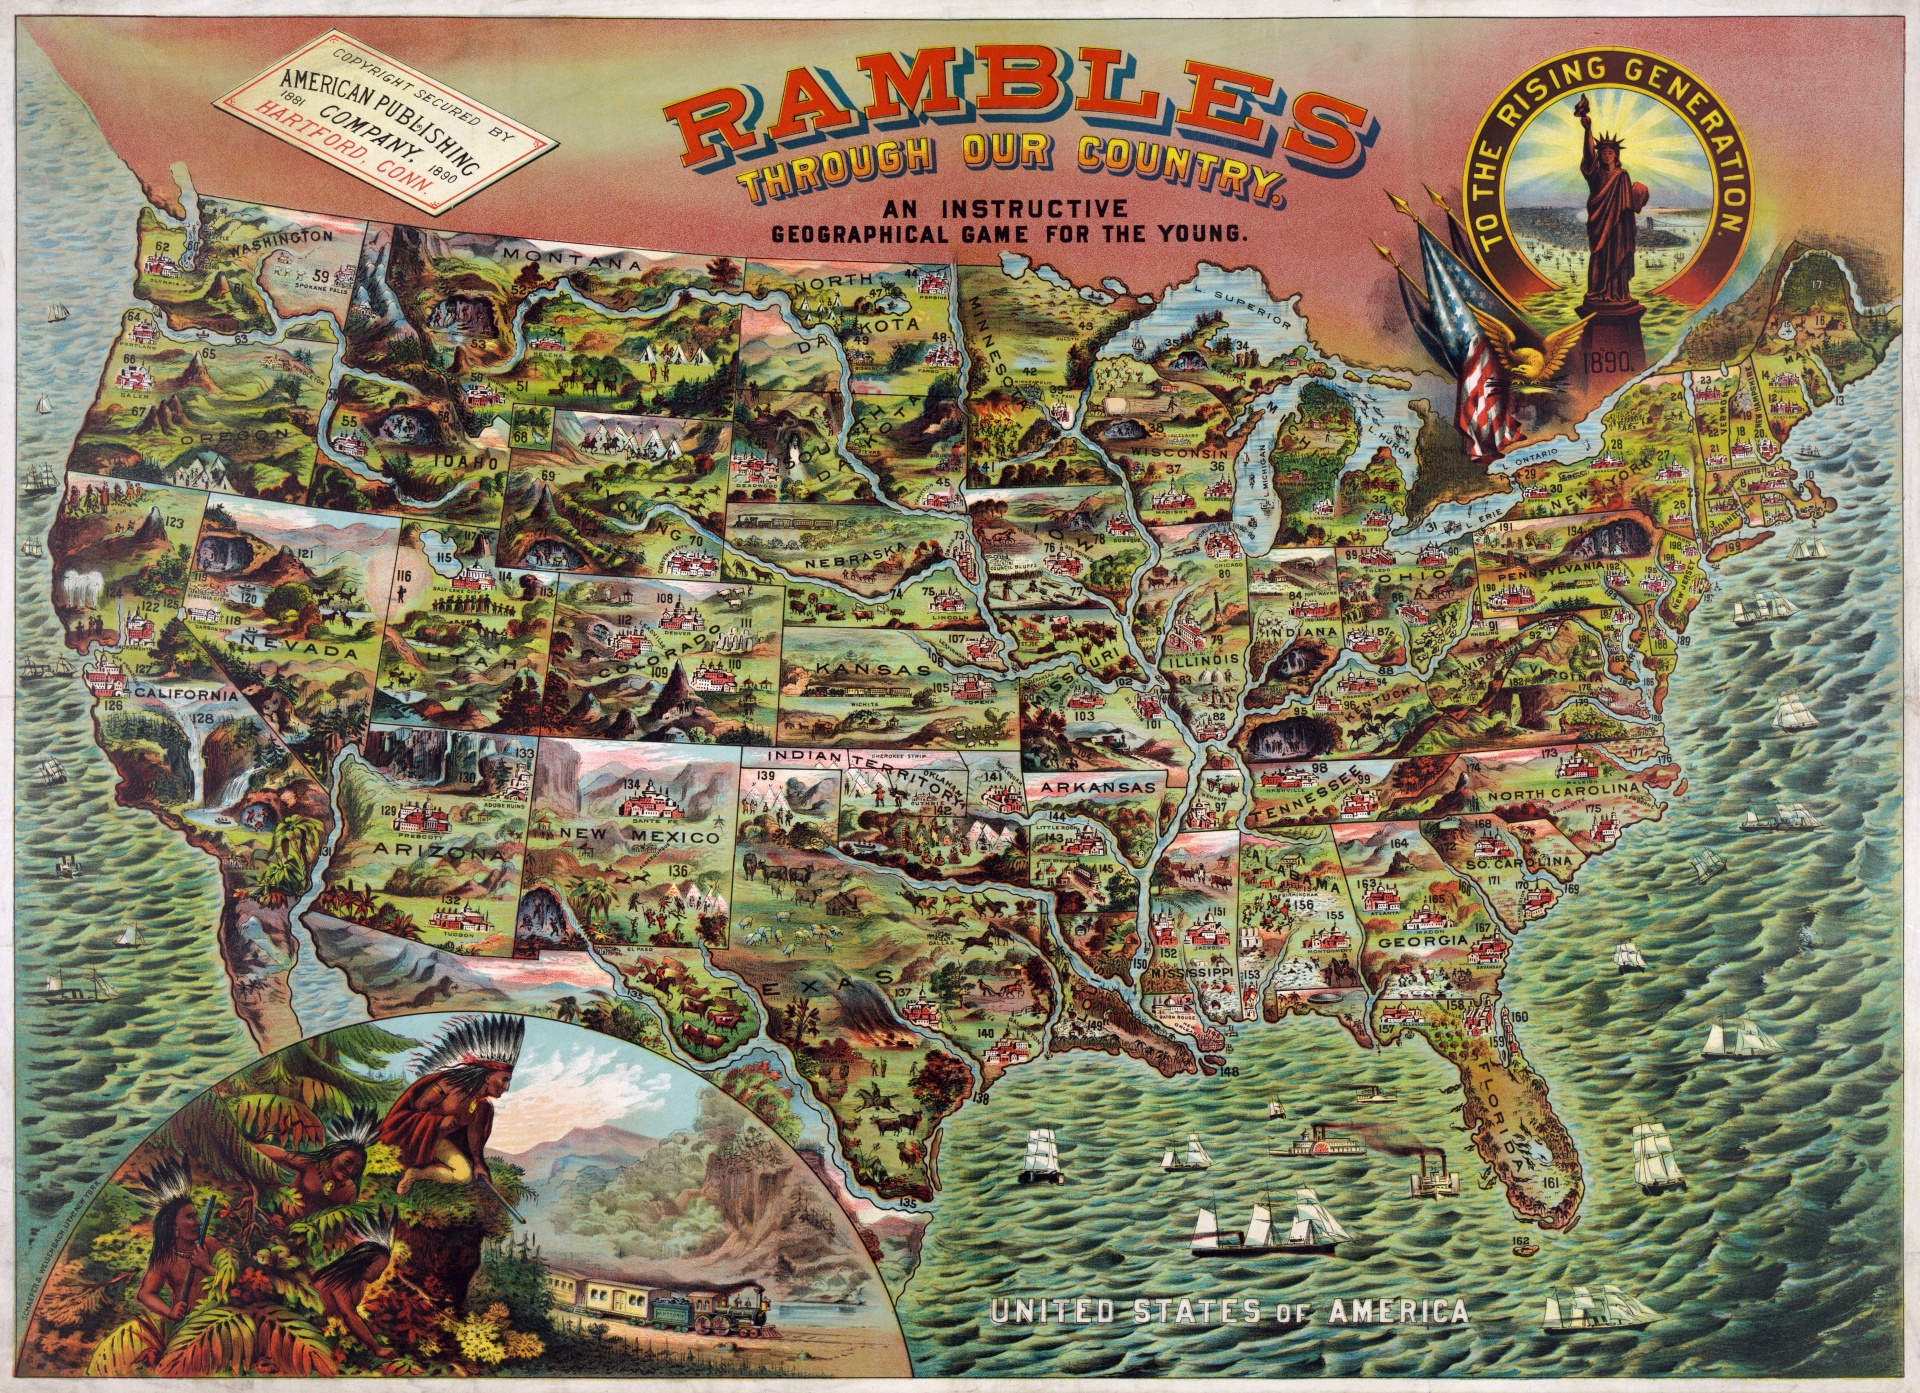 Rambles through our country, an instructive geographical game for the young. To the rising generation. Copyright secured by American Publishing Company, Hartford, Connecticut.